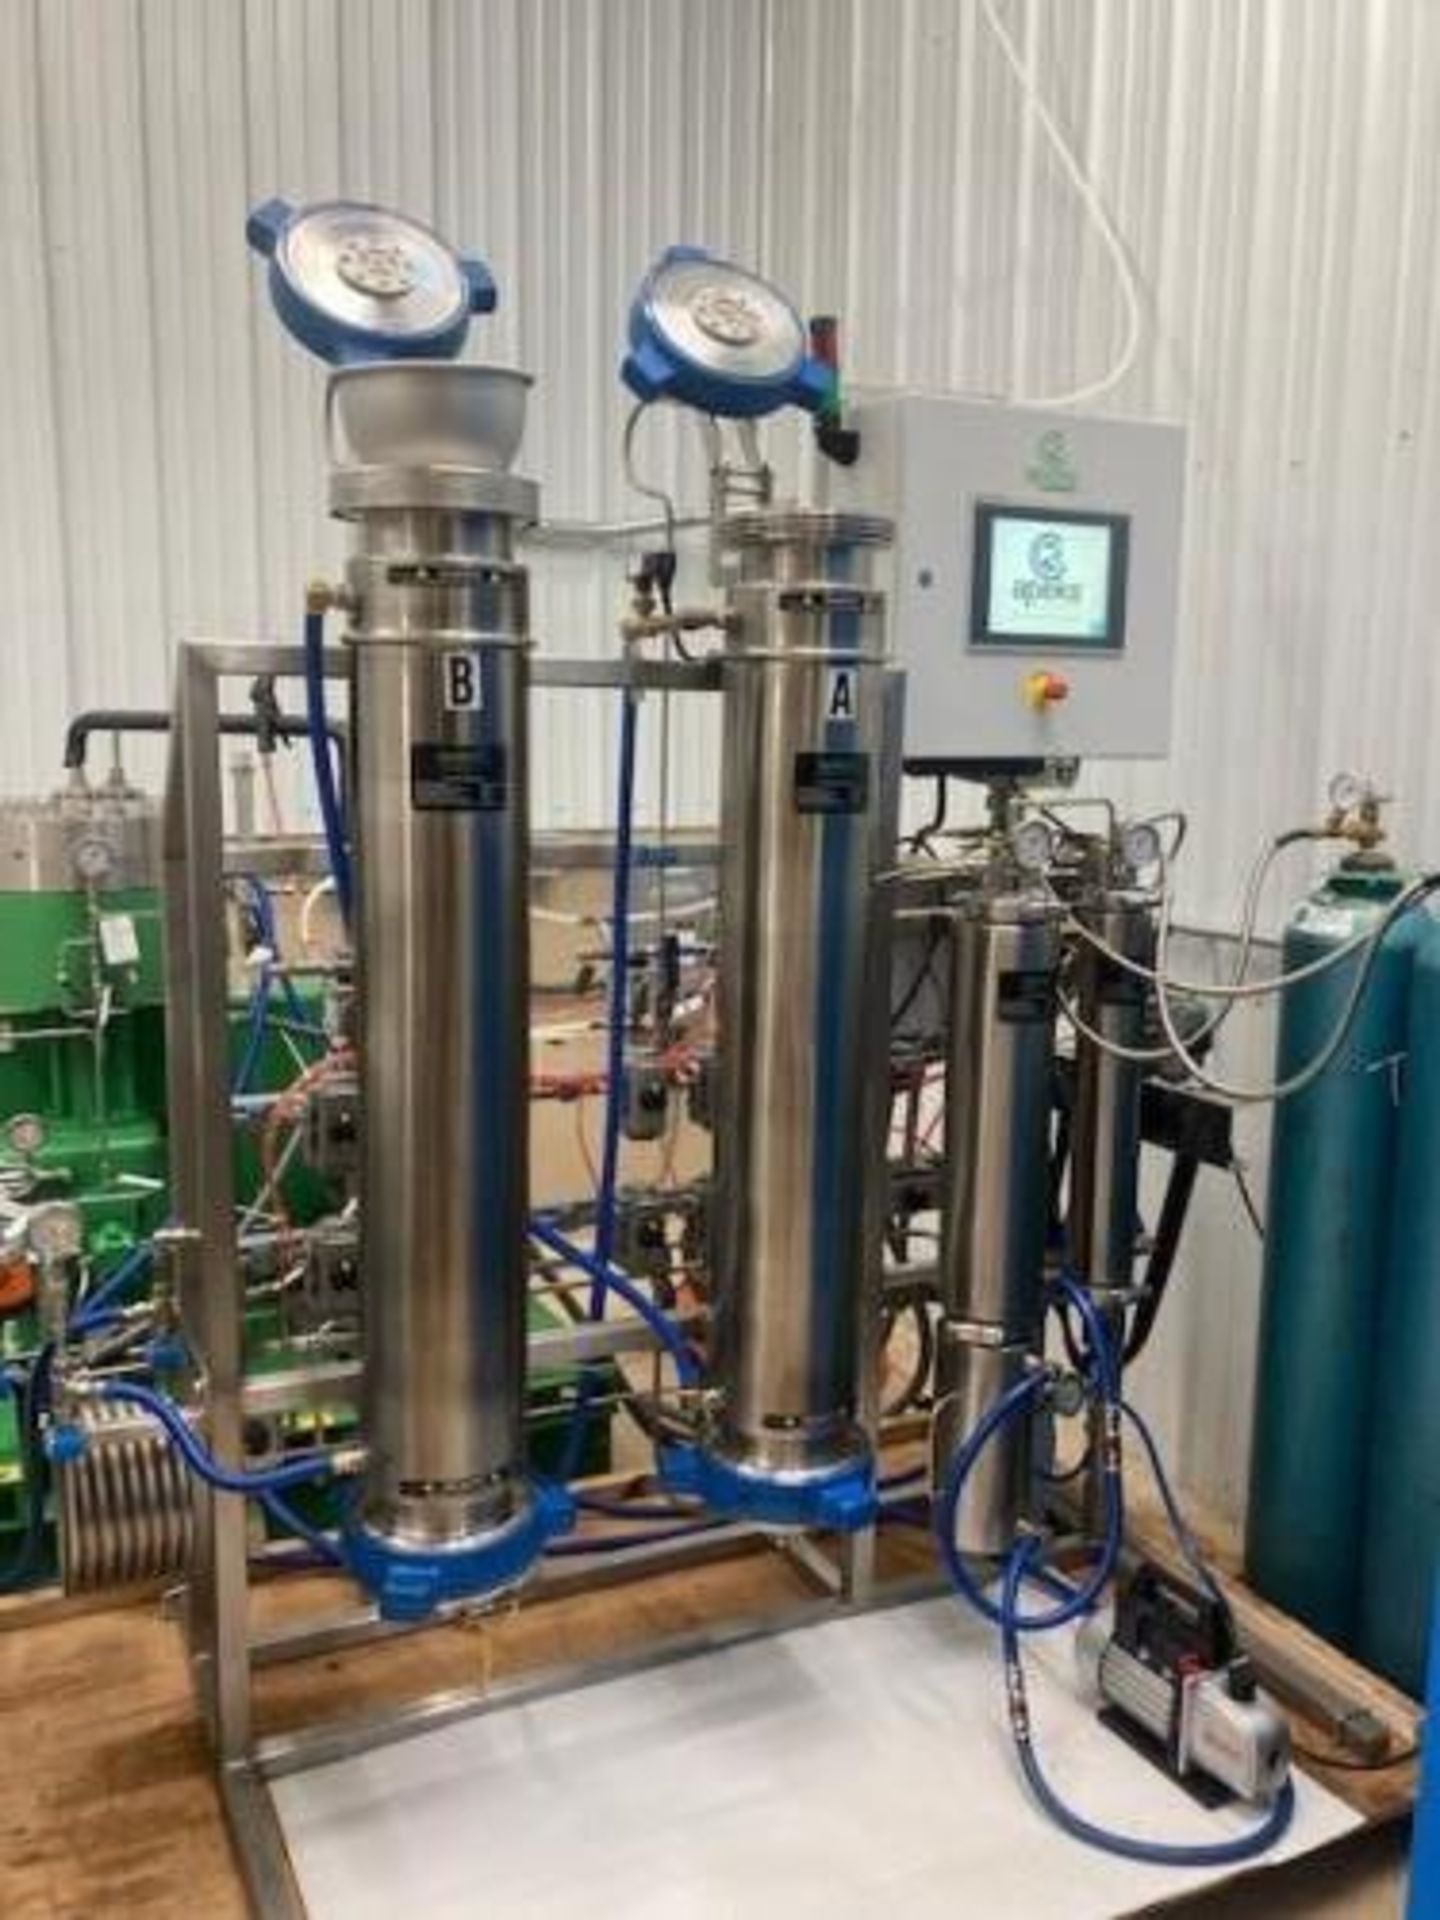 Used-Apeks "Transformer" Subcritical & Supercritical CO2 Extraction System, Model 2000 20L X 20LD - Image 3 of 14